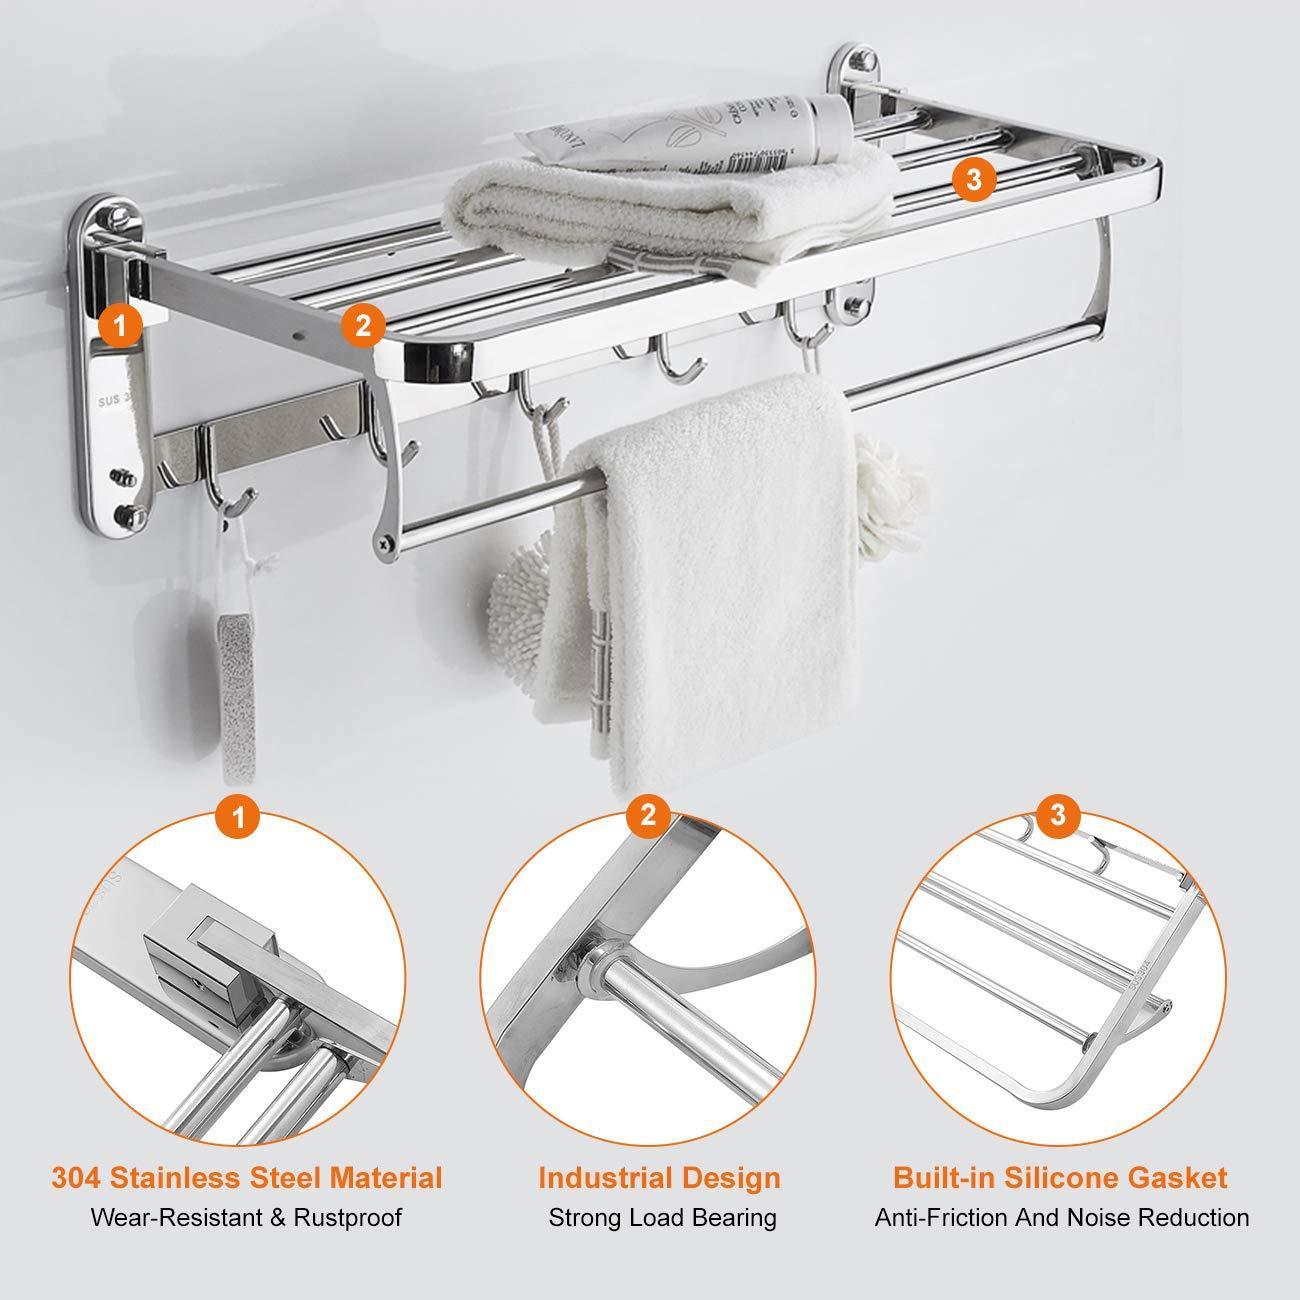 Budget beamnova foldable towel rack 20 inch with shelf towel rack with bar hooks wall mounted easy installation towel holder stainless steel for shower bathroom kitchen